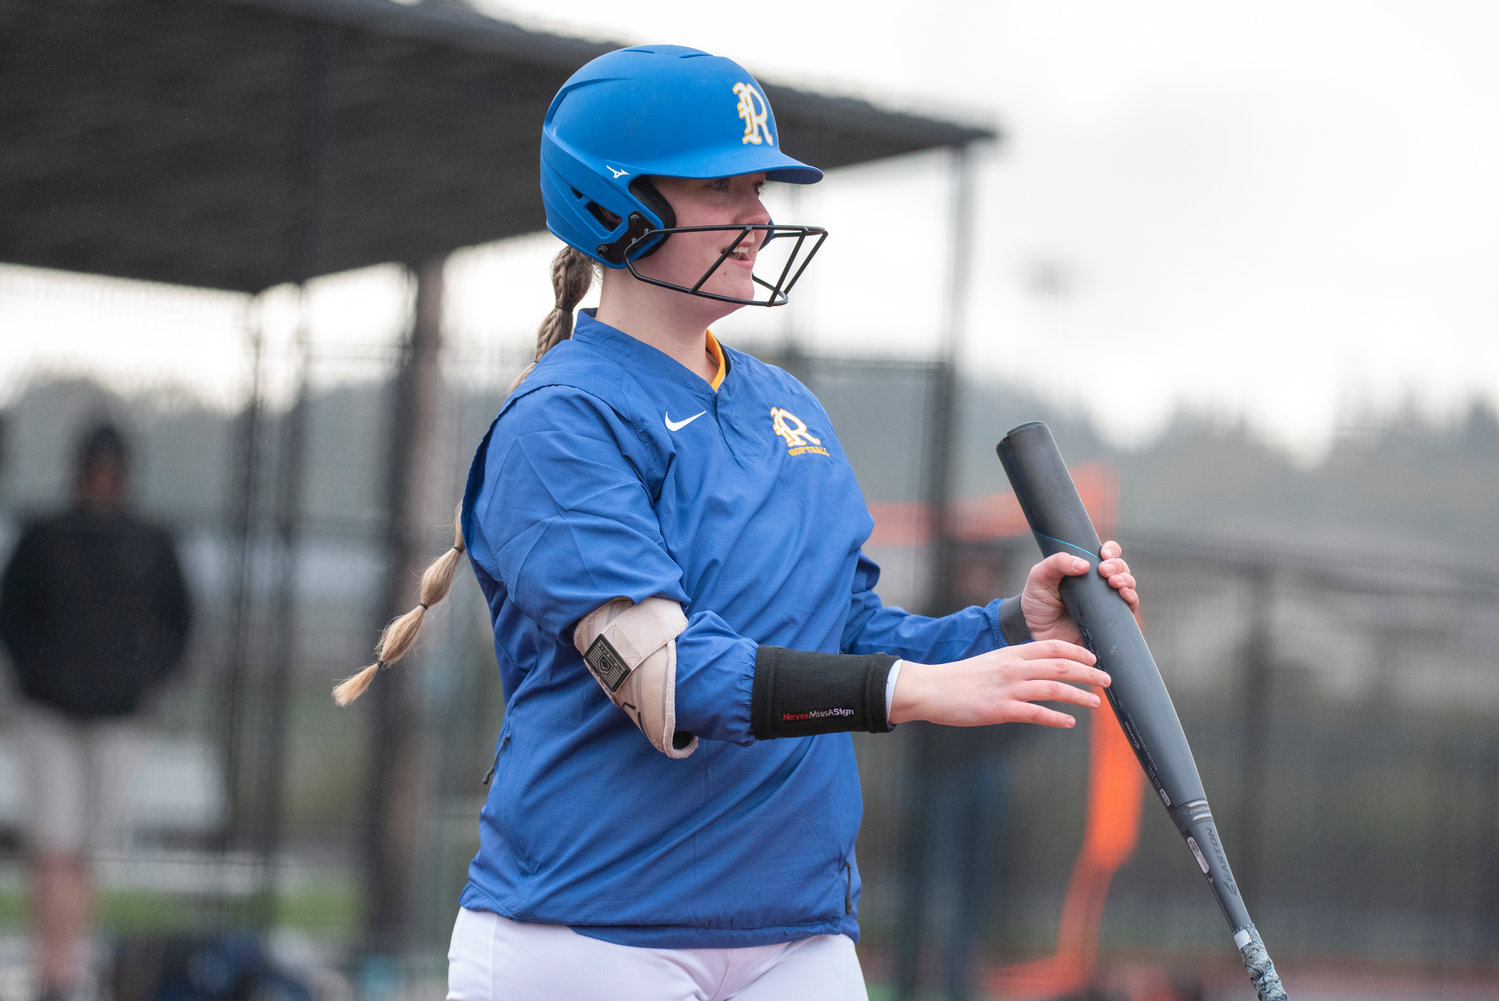 Rochester senior Lakota Escott smiles during an at-bat against W.F. West at Chehalis Sports Complex on April 13.